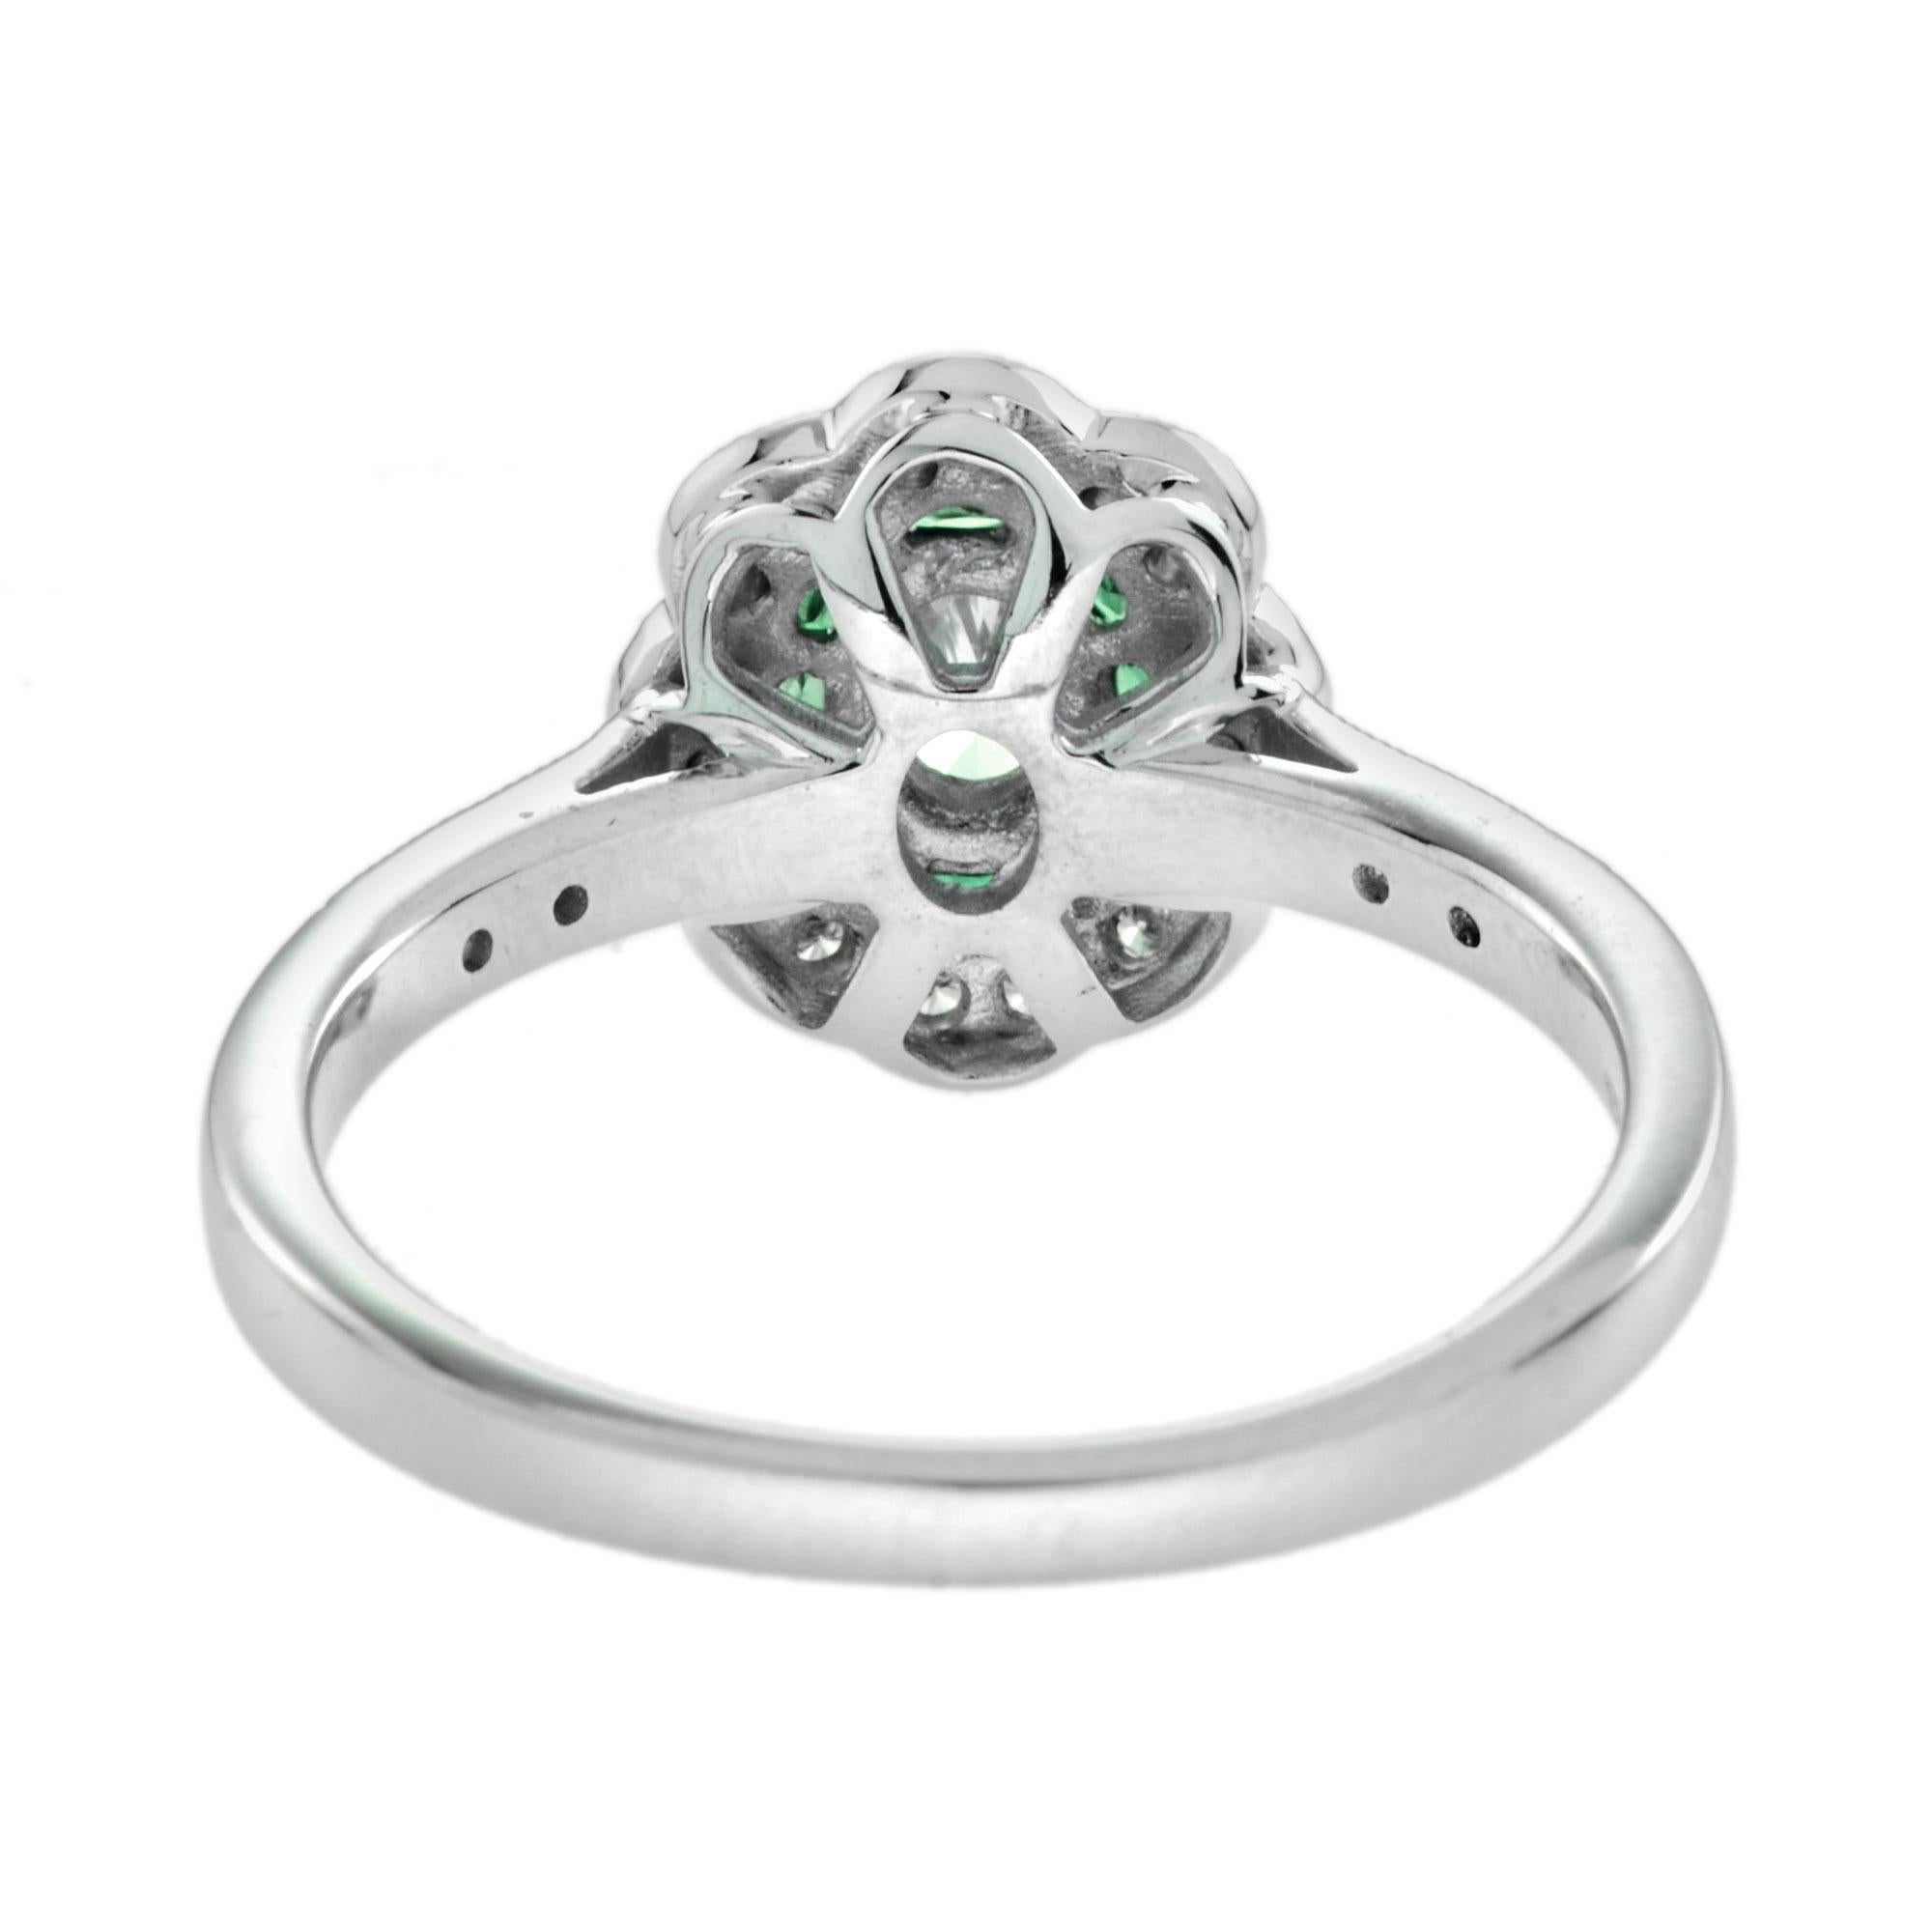 Women's 0.15 Ct. Diamond and Emerald Art Deco Style Engagement Ring in 18K White Gold For Sale